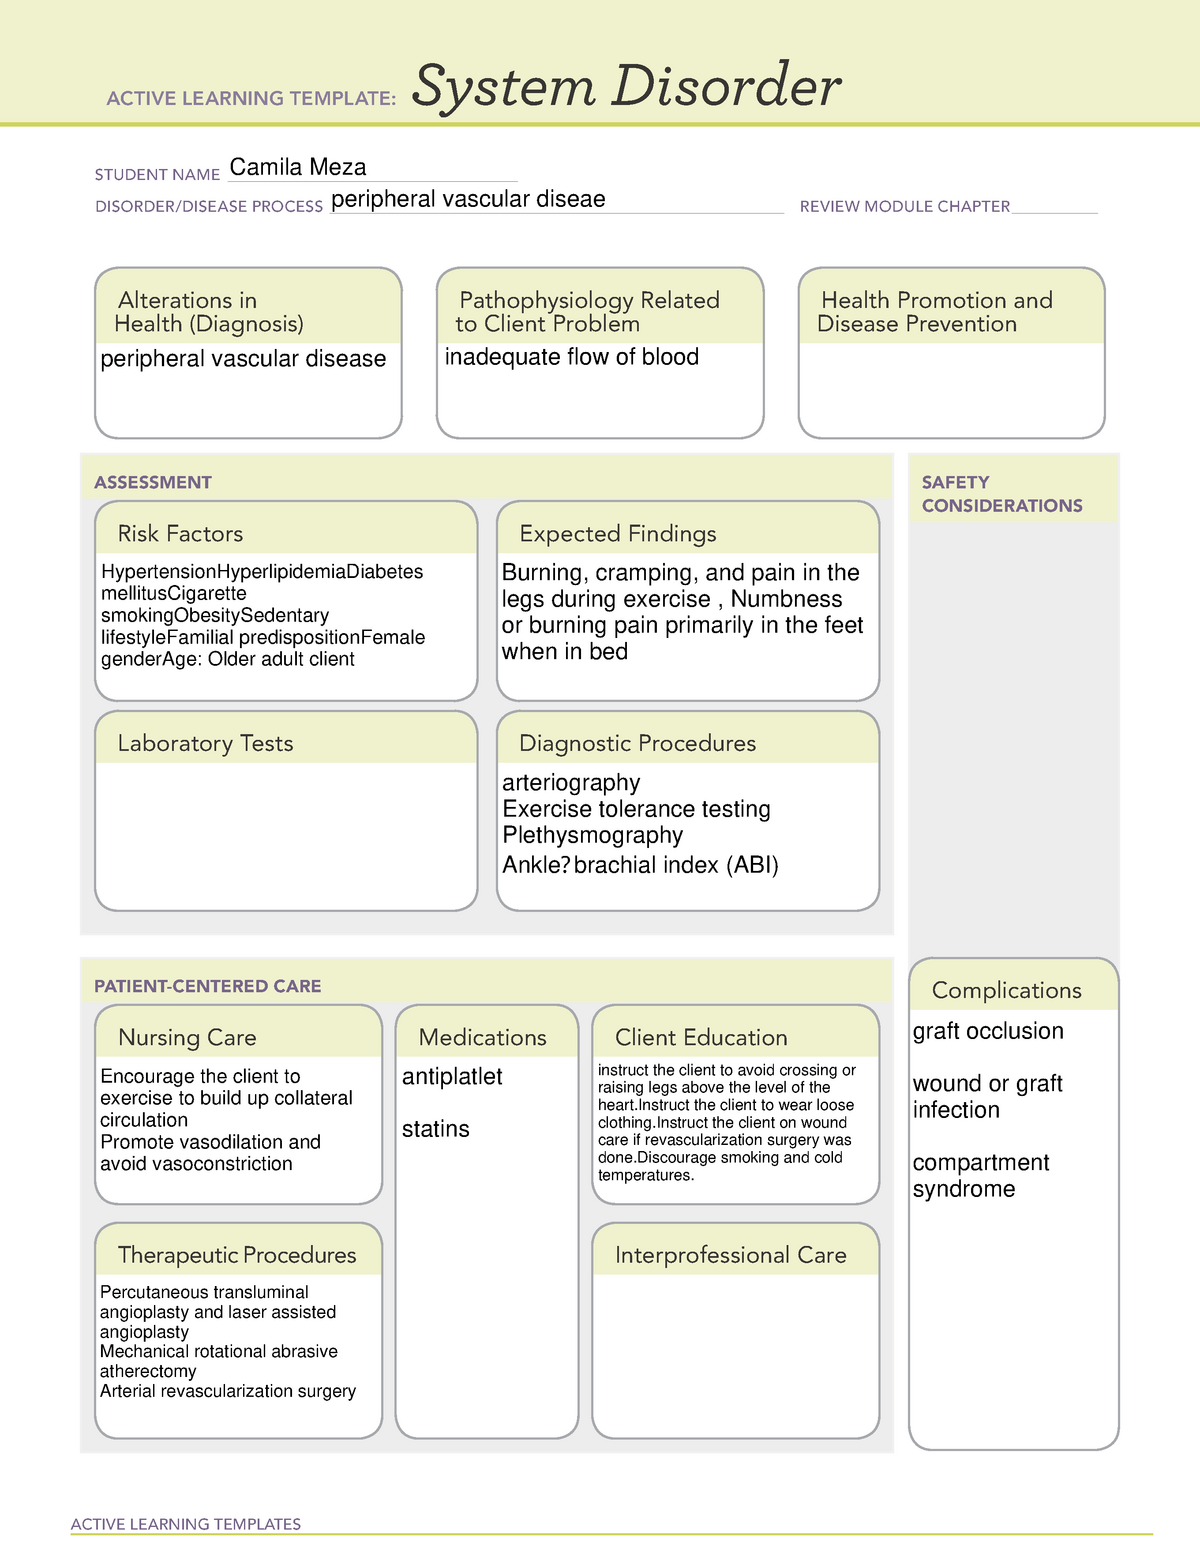 Remediation 20 peripheral vascular disease ACTIVE LEARNING TEMPLATES